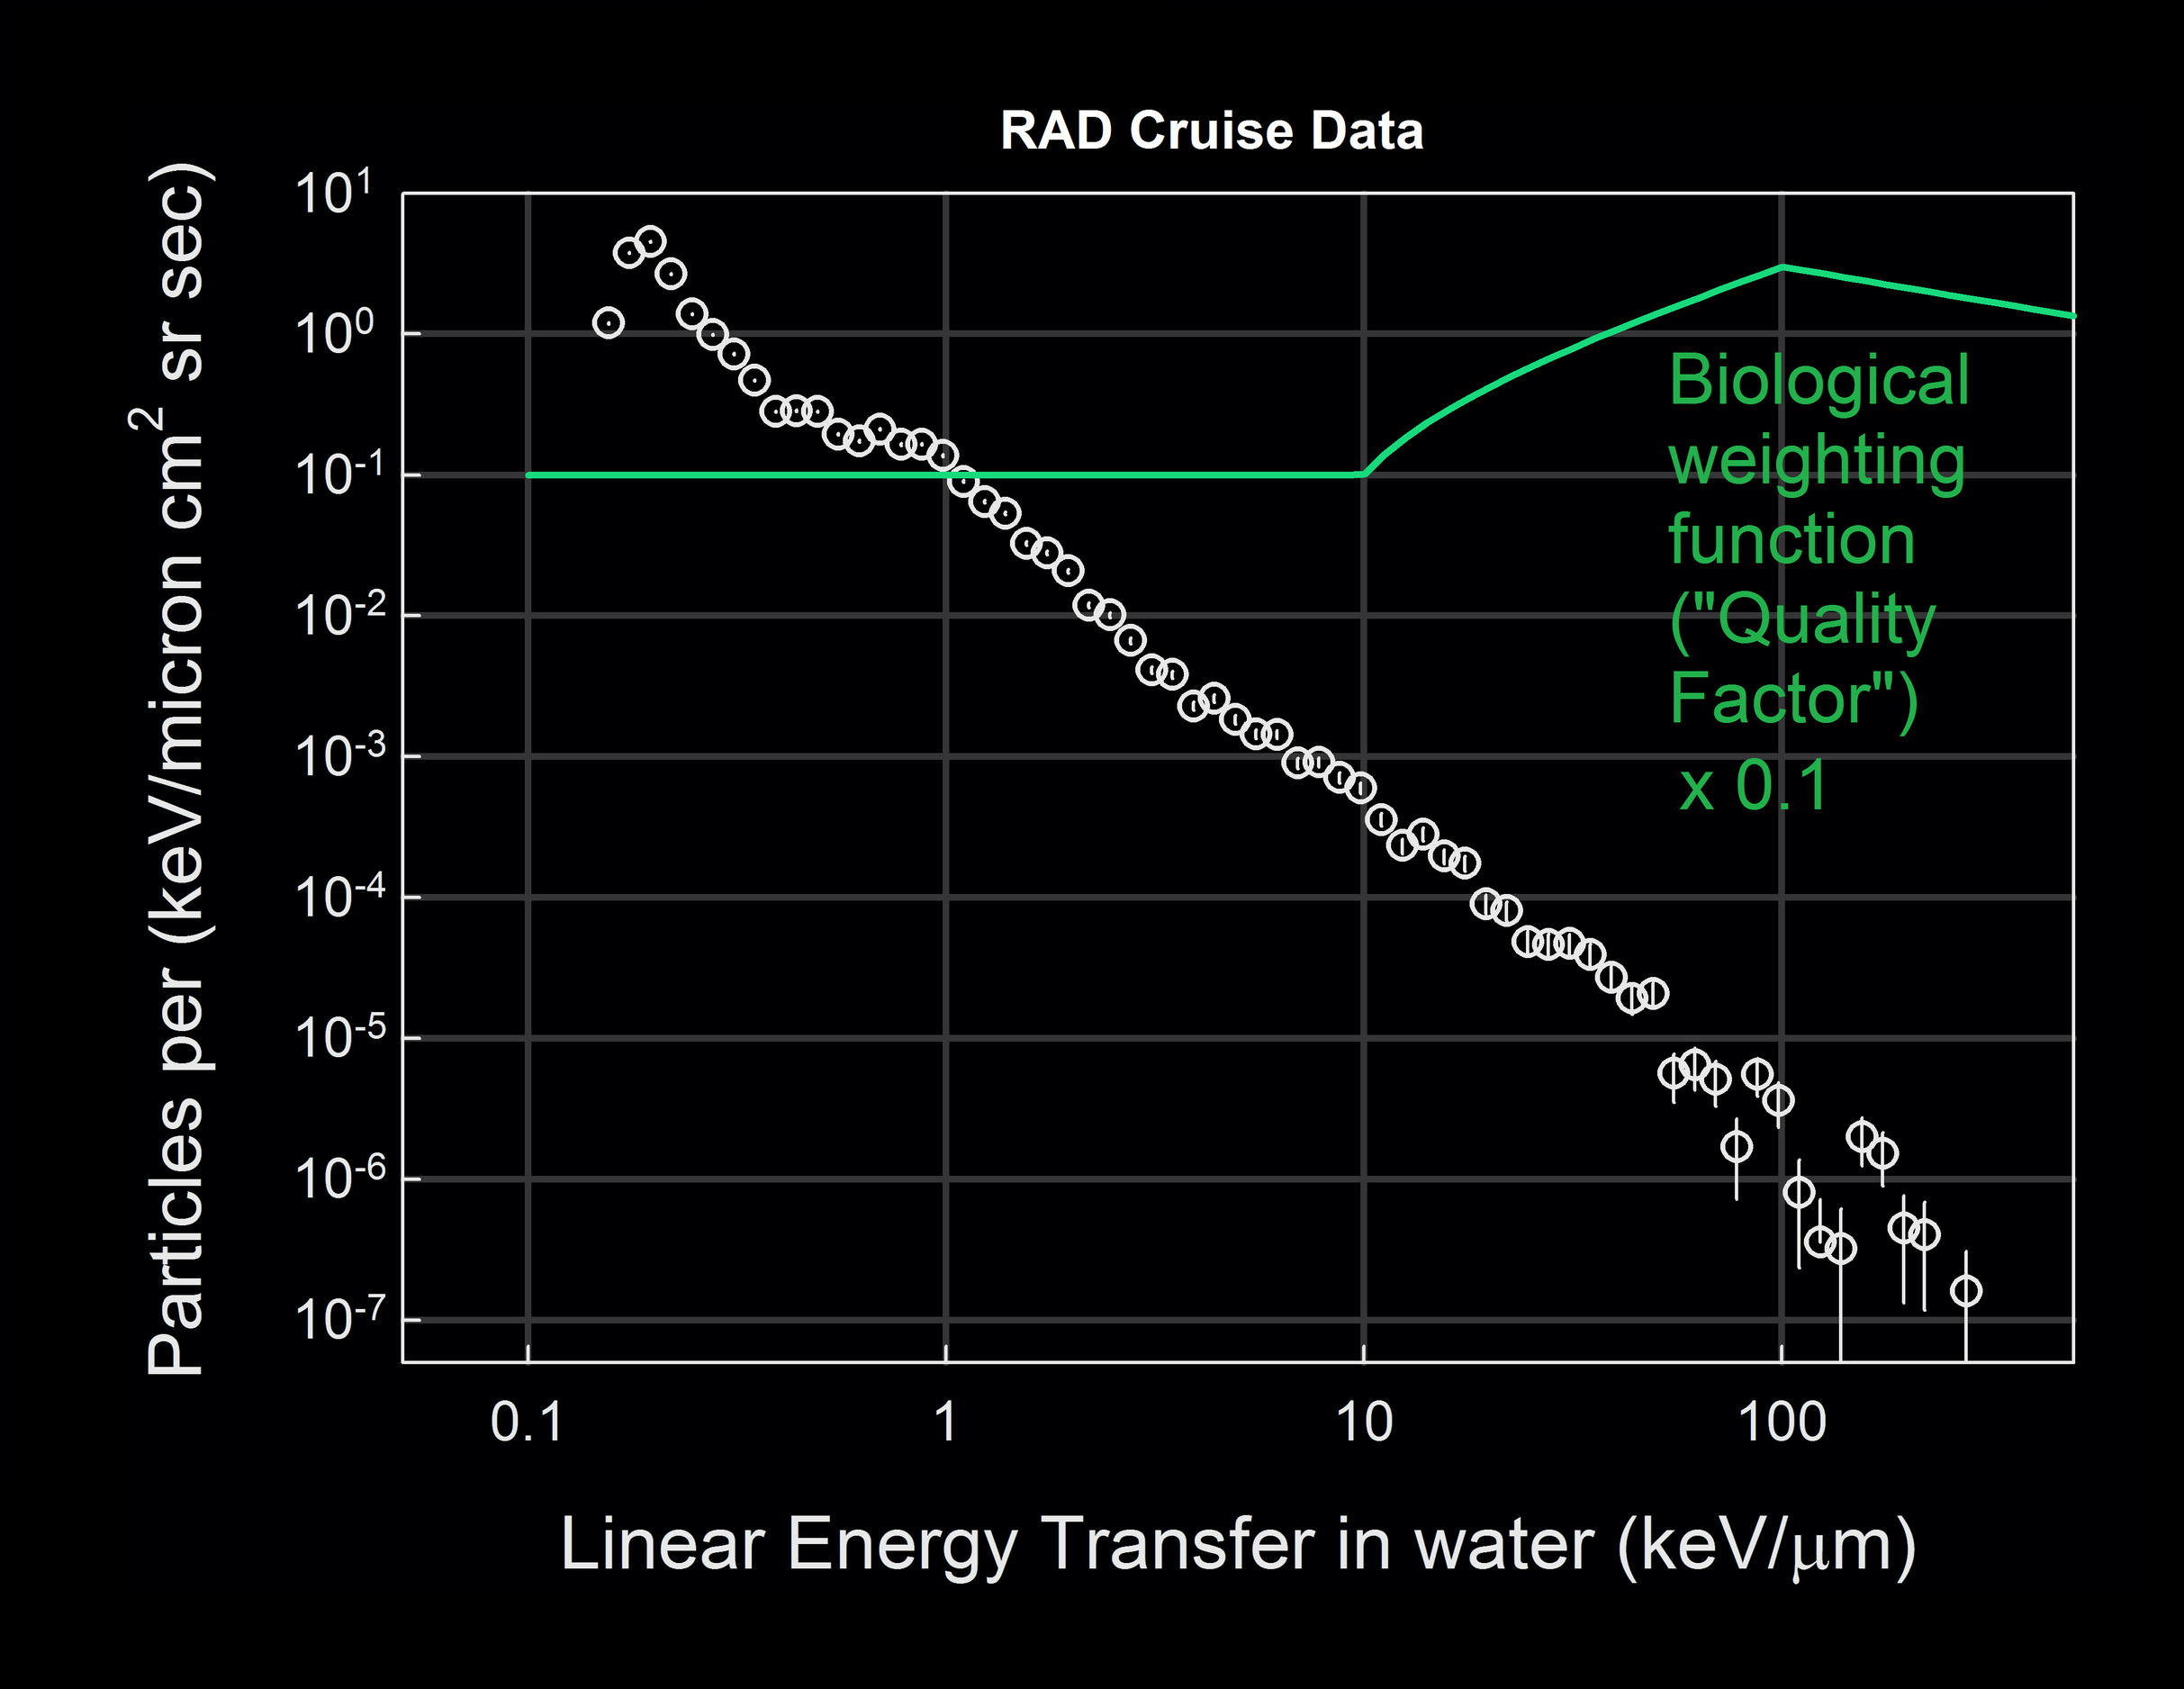 The relationship between charged-particle radiation dose measured with silicon sensors and the dose that biological tissue would receive in the same setting is assessed as a function of how much energy the charged particles would deposit in water (which serves as a proxy for biological tissue).